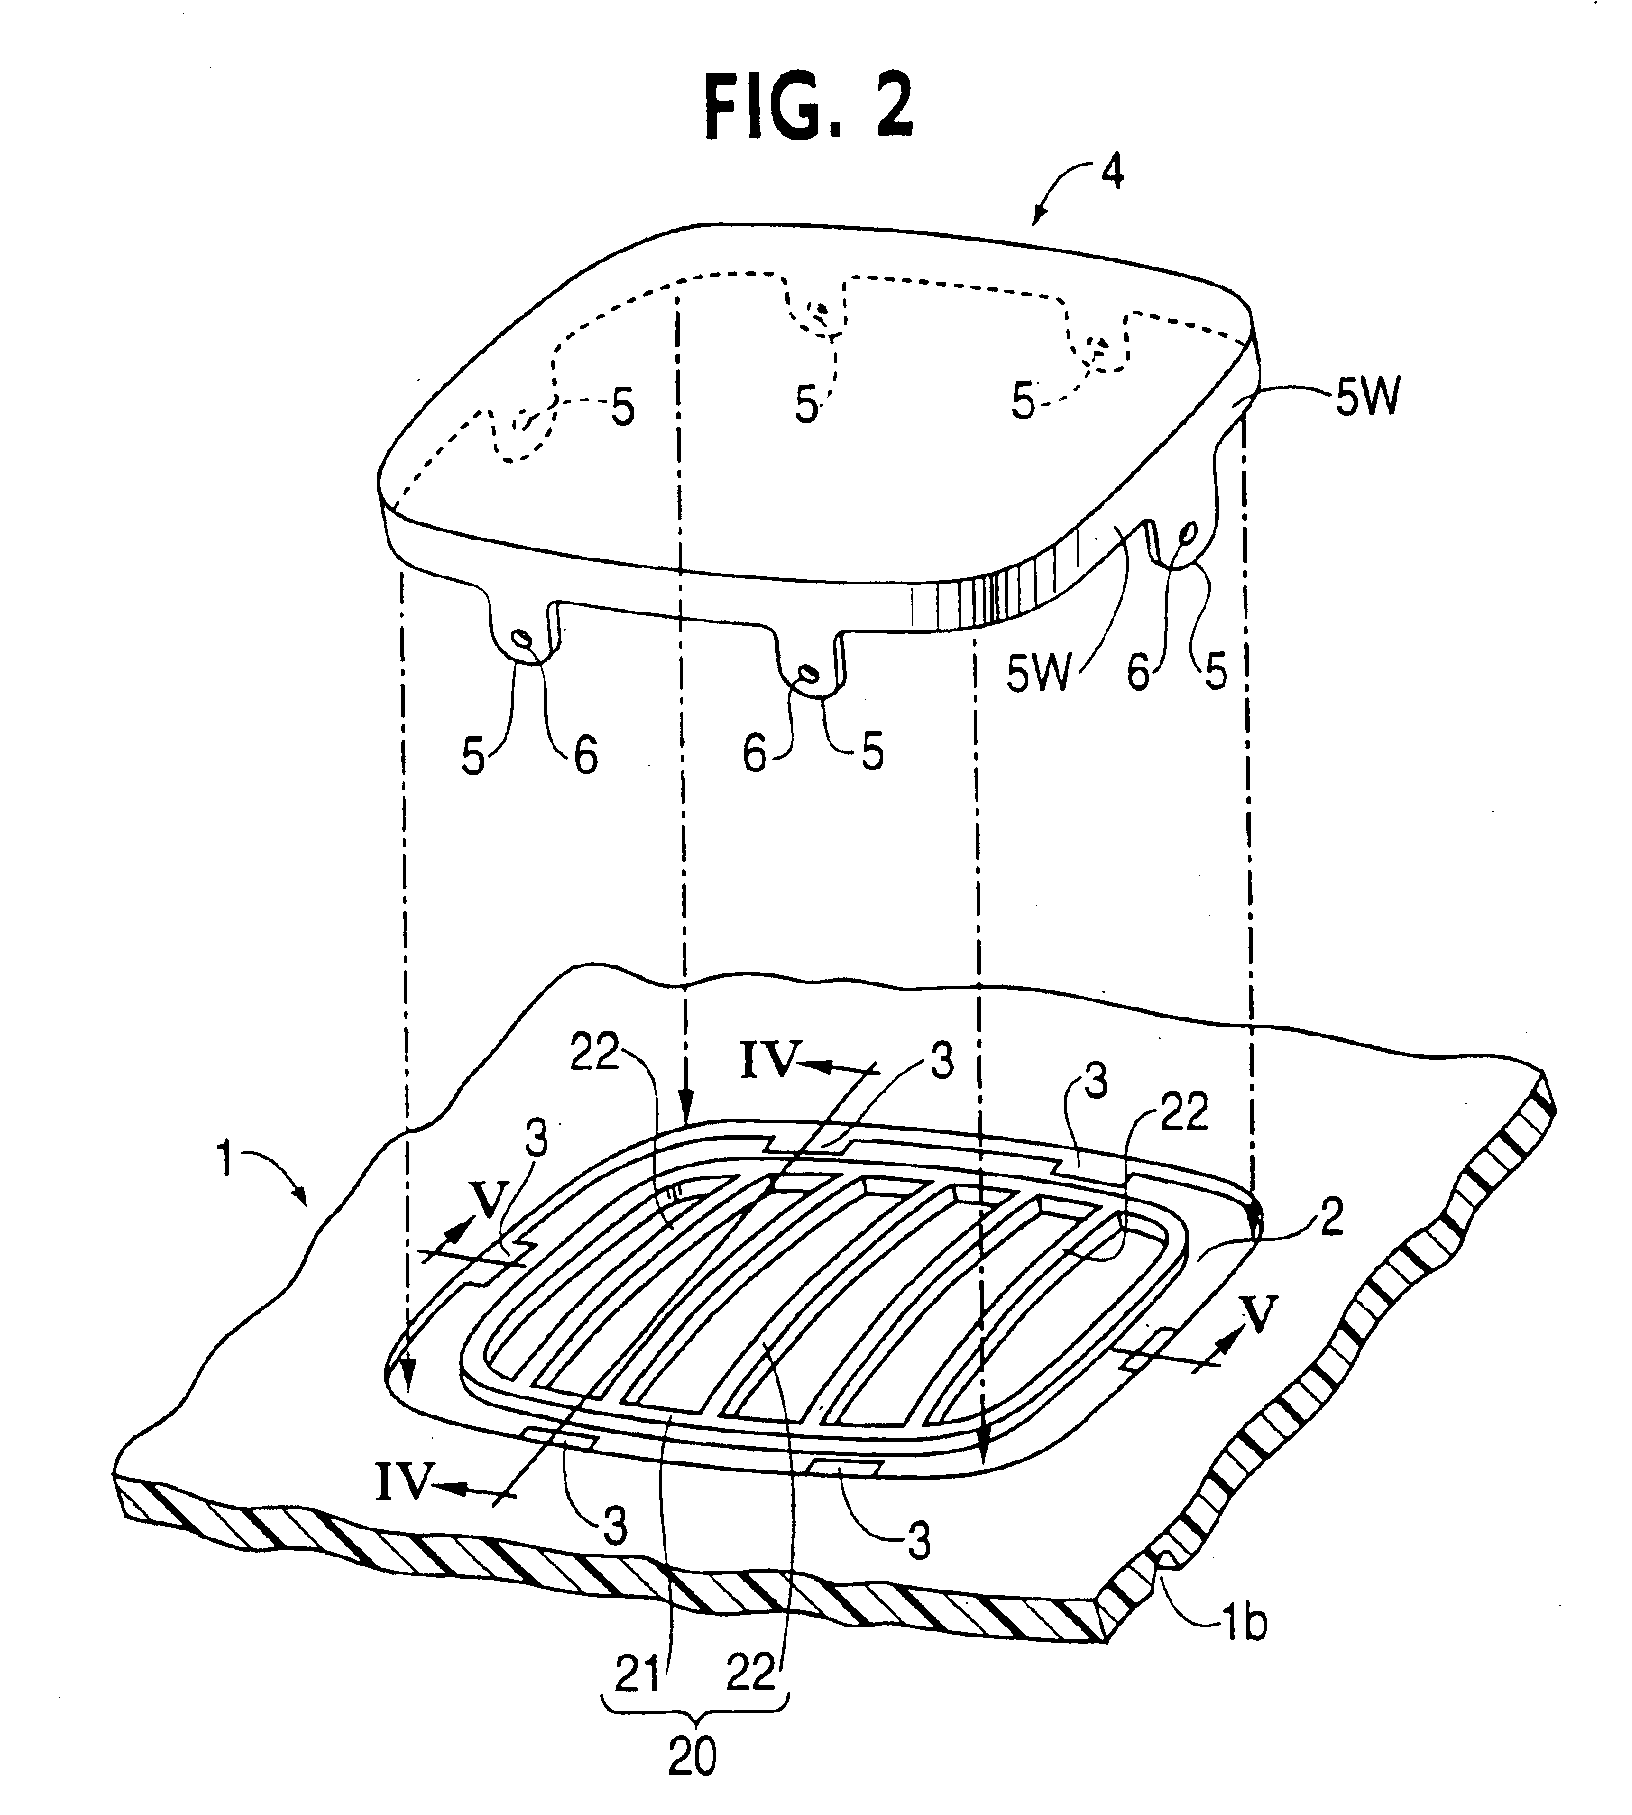 Cover for air bag device